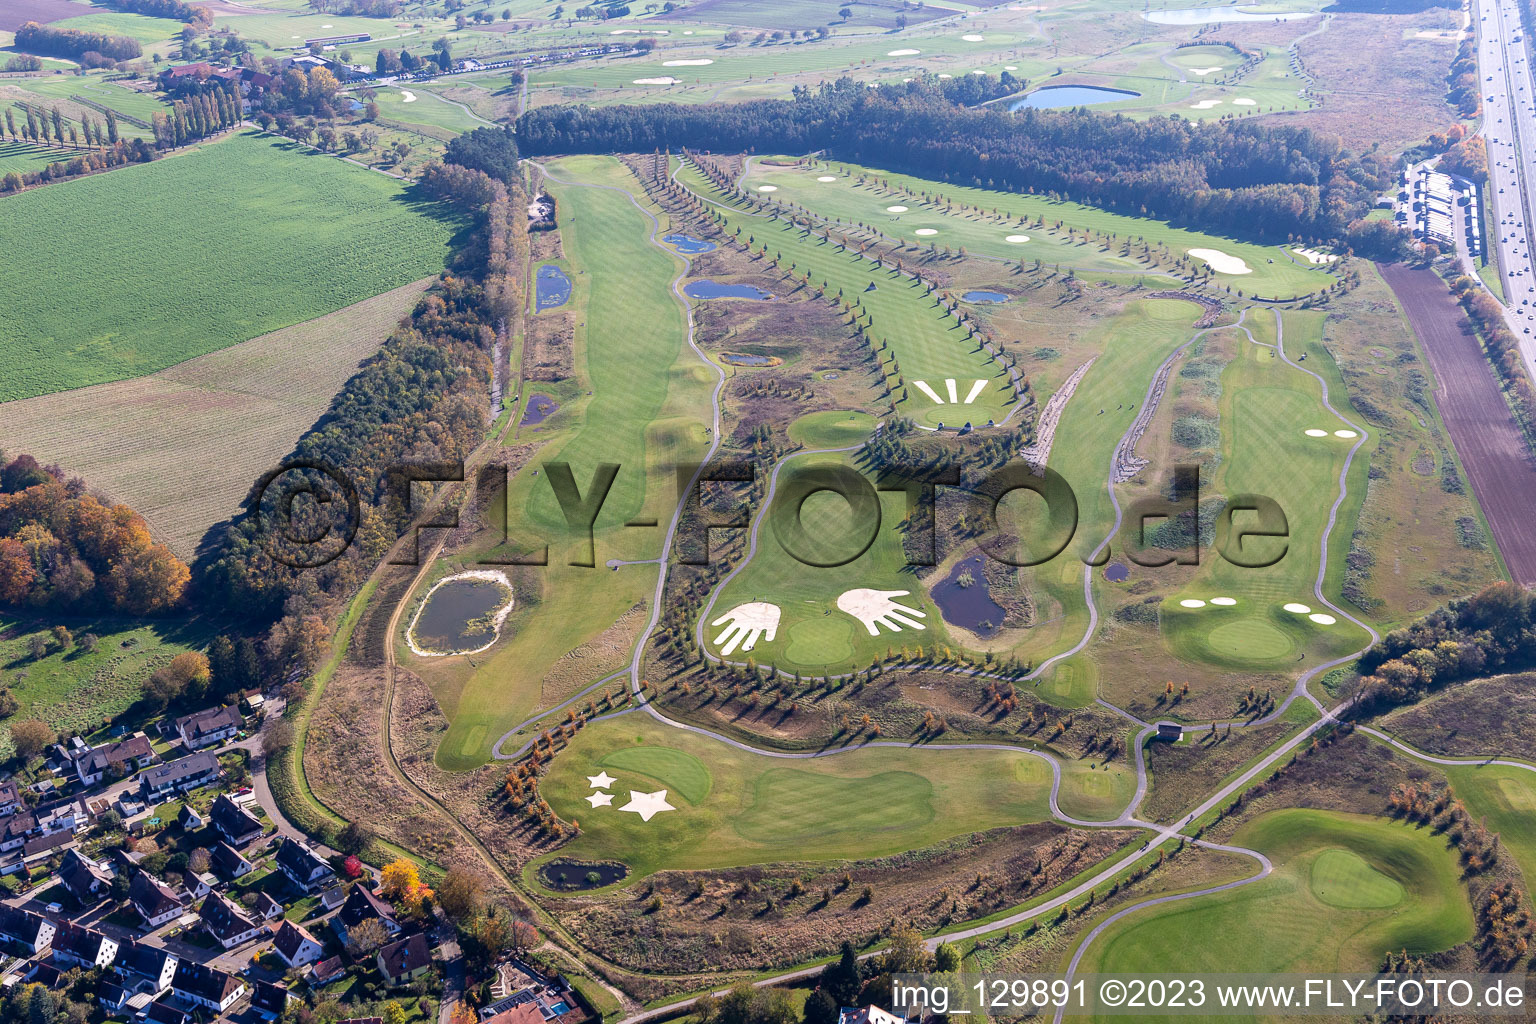 Grounds of the Golf course at Golfpark Karlsruhe GOLF absolute in Karlsruhe in the state Baden-Wuerttemberg, Germany from above